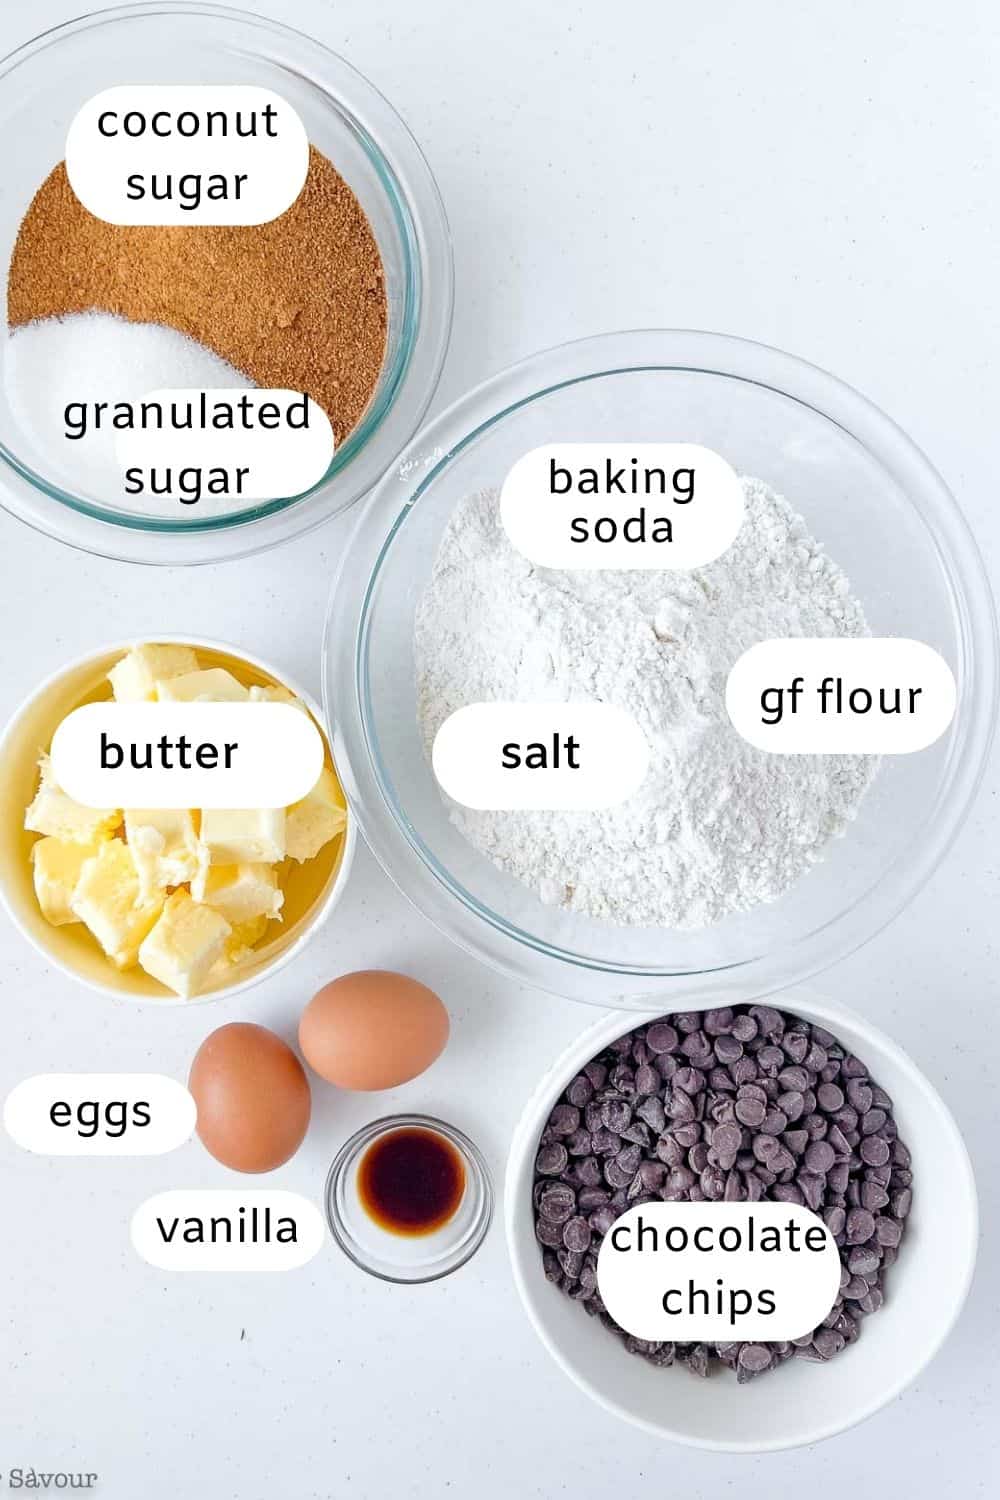 Labelled ingredients for Gluten-free Chewy Chocolate Chip Cookies